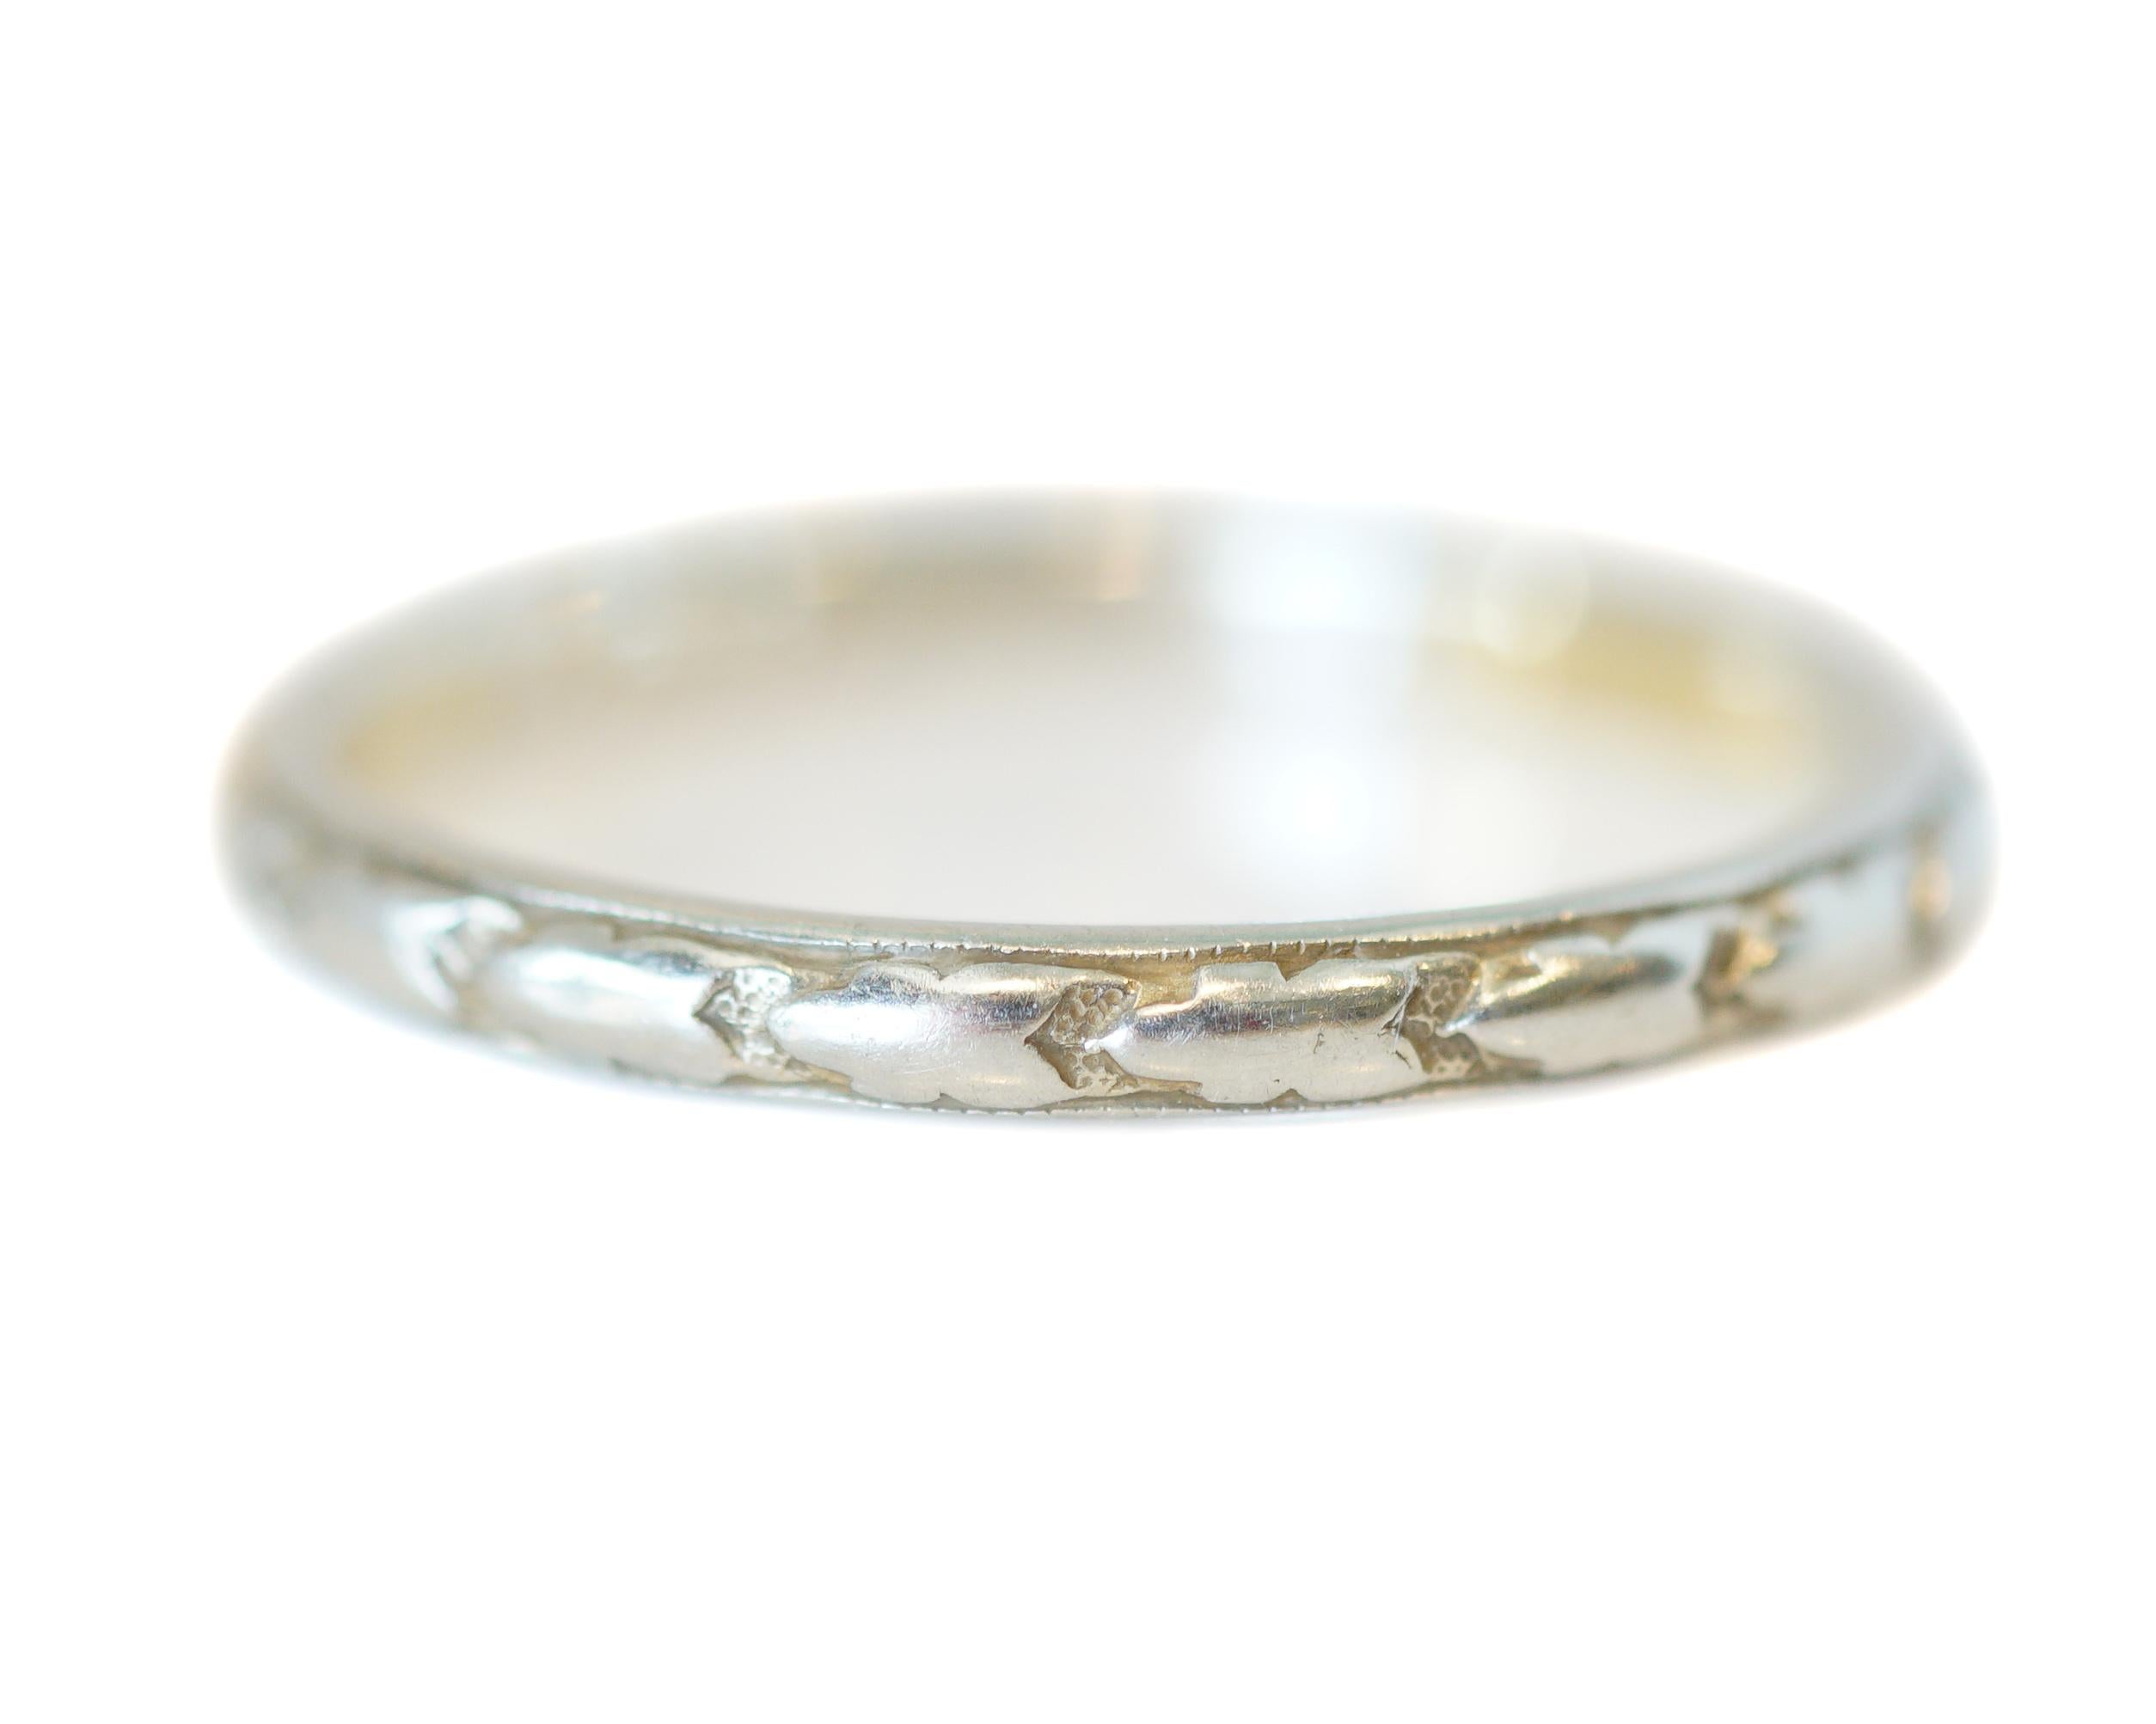 Beautiful and dainty wedding band from the 1920's. This band is from the Art Deco era and features a pretty arrow like pattern around the band. This band is 14k white gold and pairs well with engagement rings or could also be worn alone. A wonderful